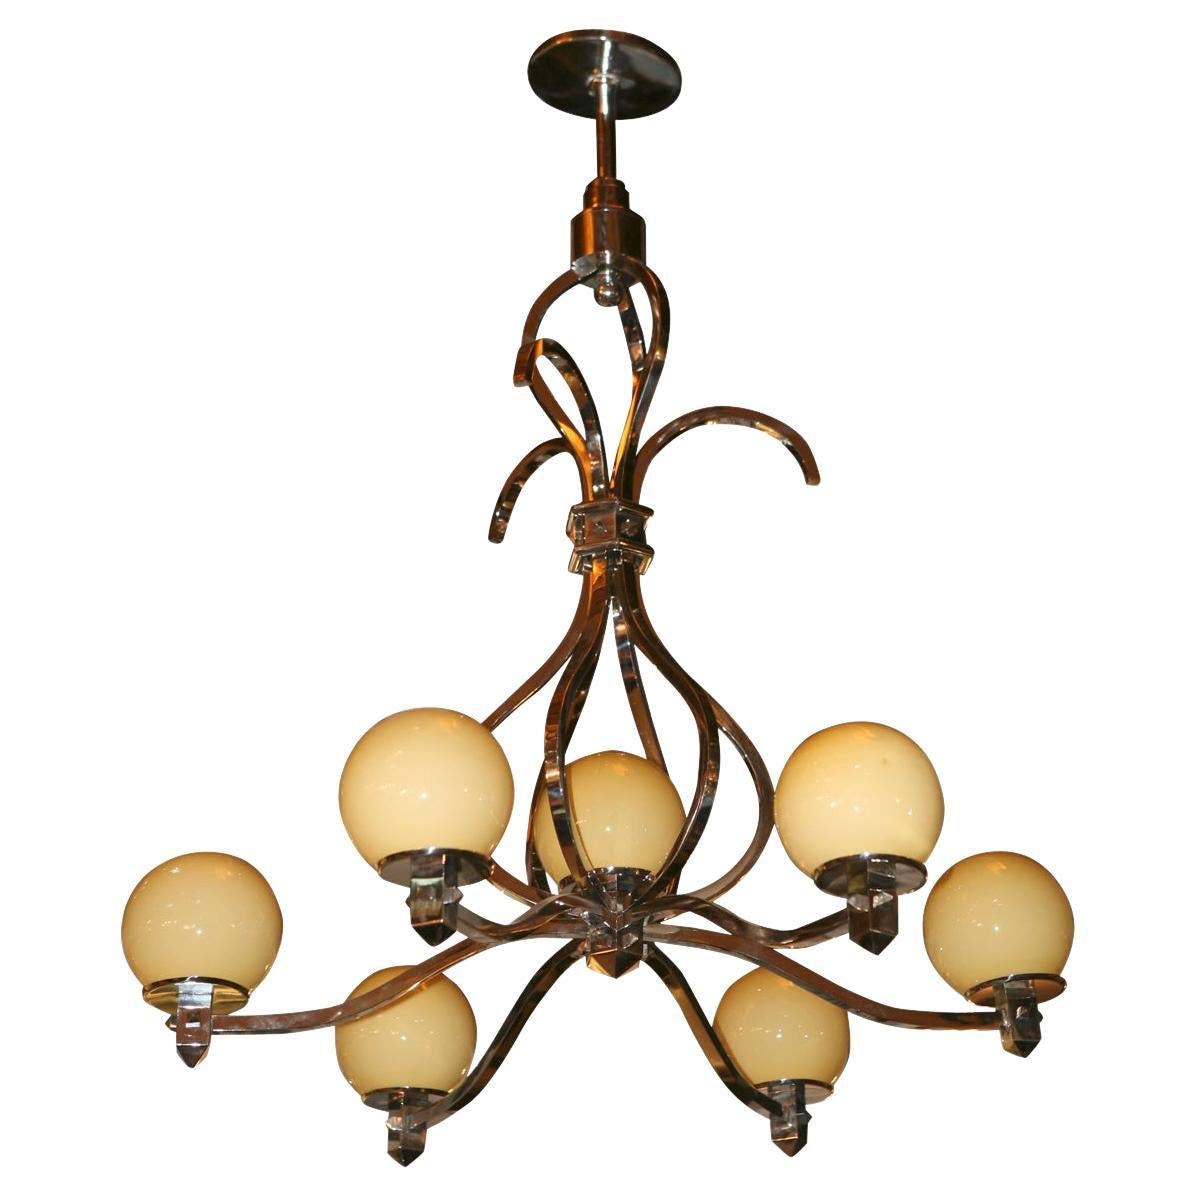 Chandelier Style: Art Deco , 1920, German, Materials: Chromed Bronze and Glass For Sale